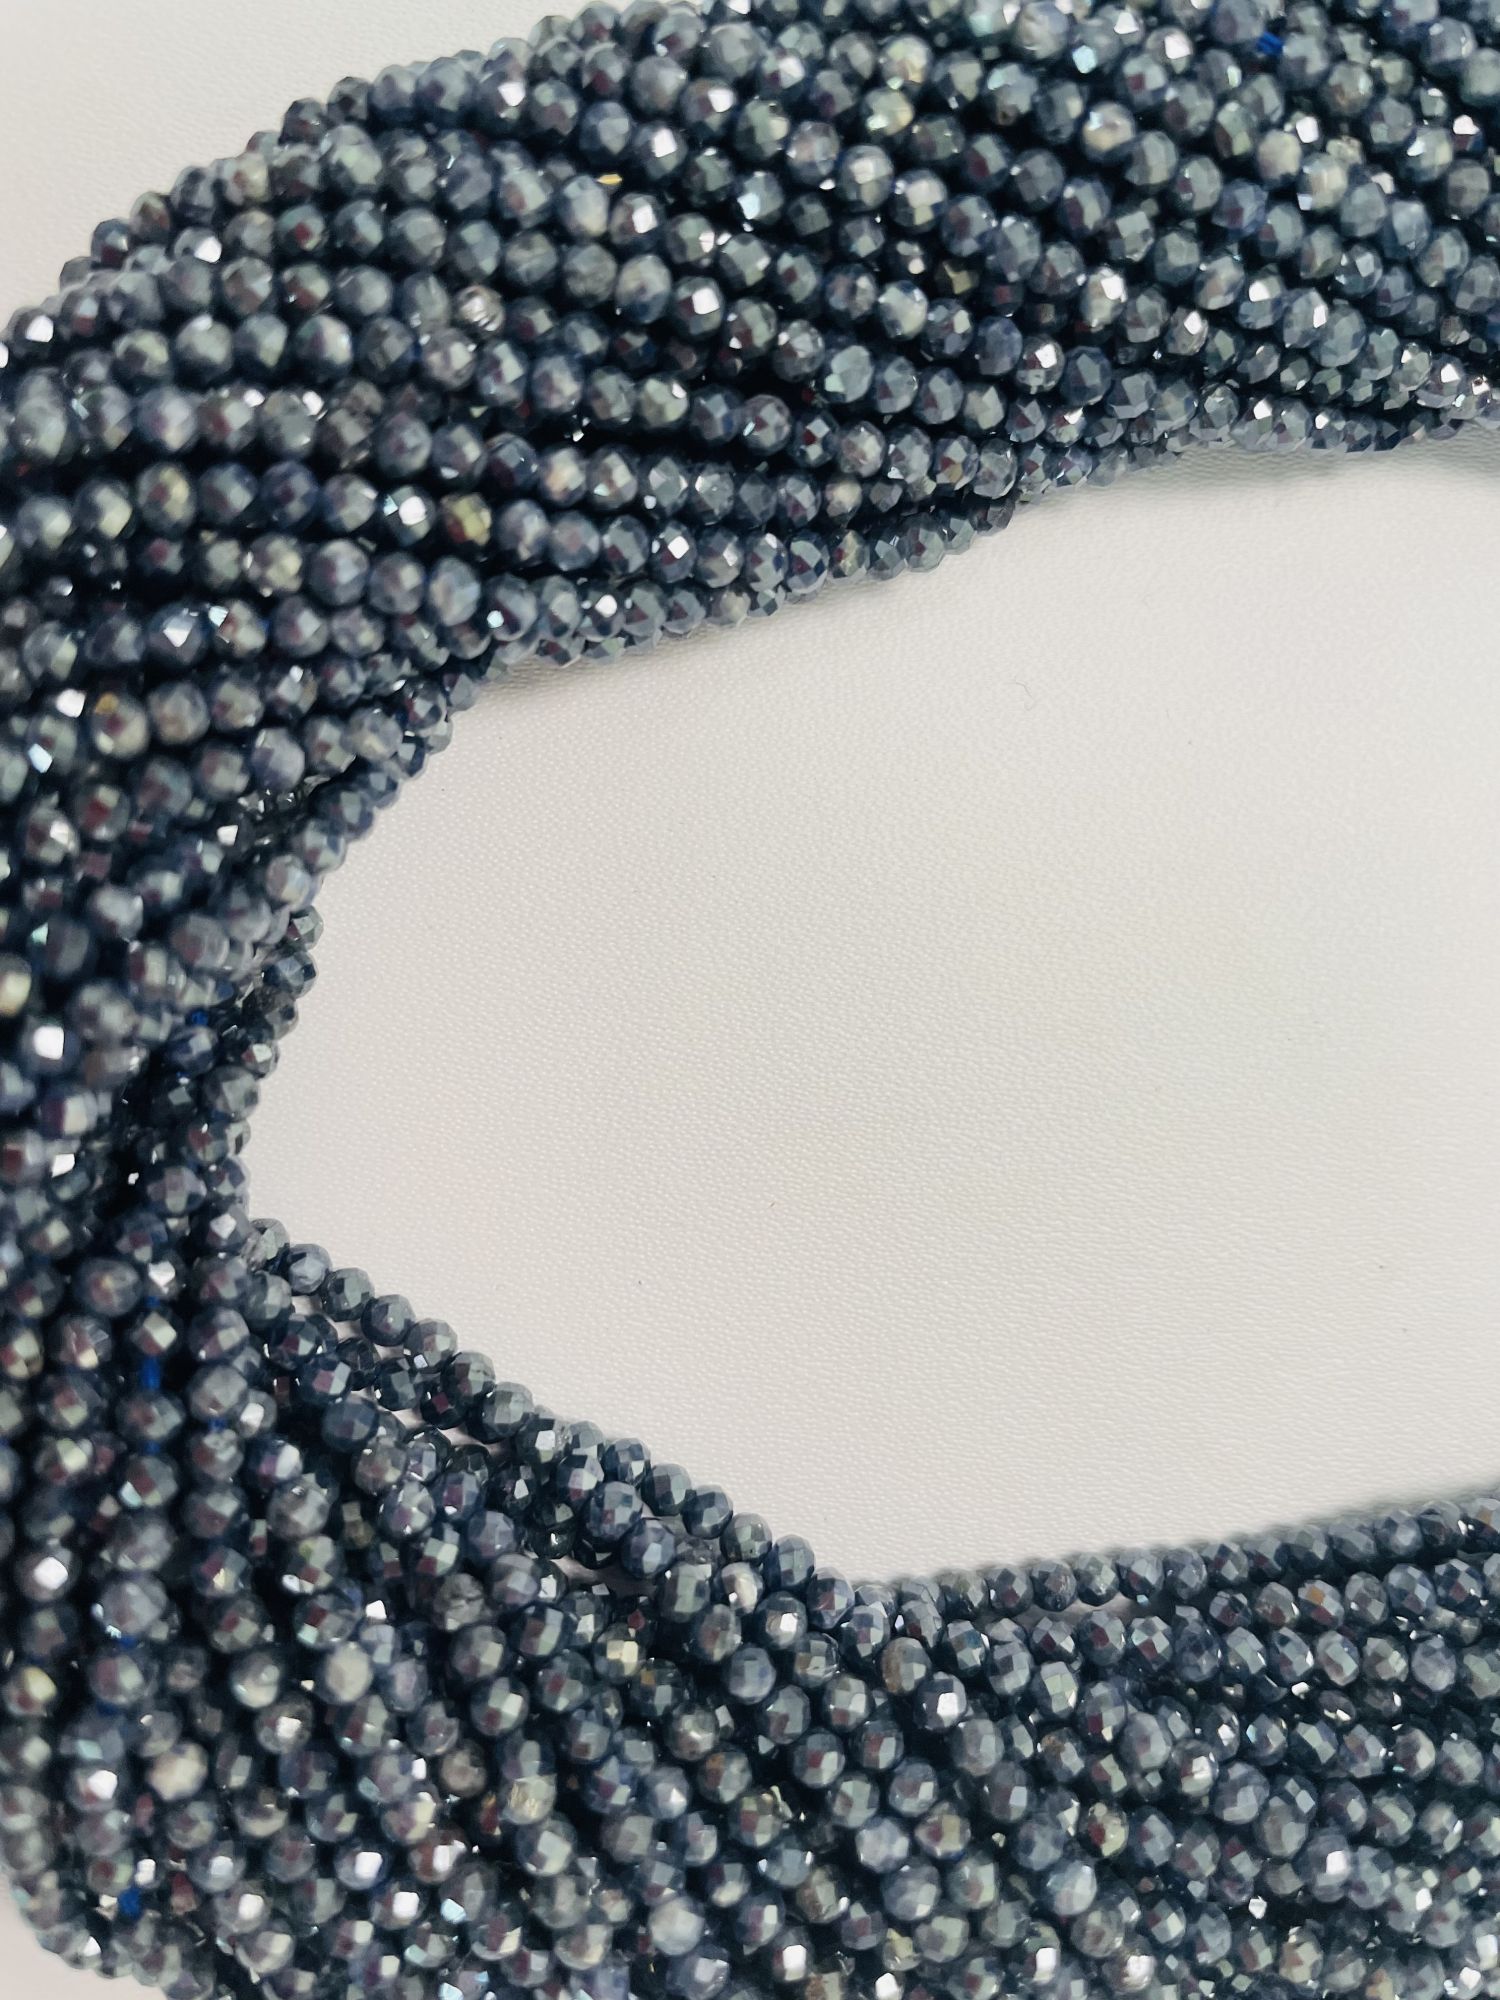 Coated Sapphire Rondelle Faceted